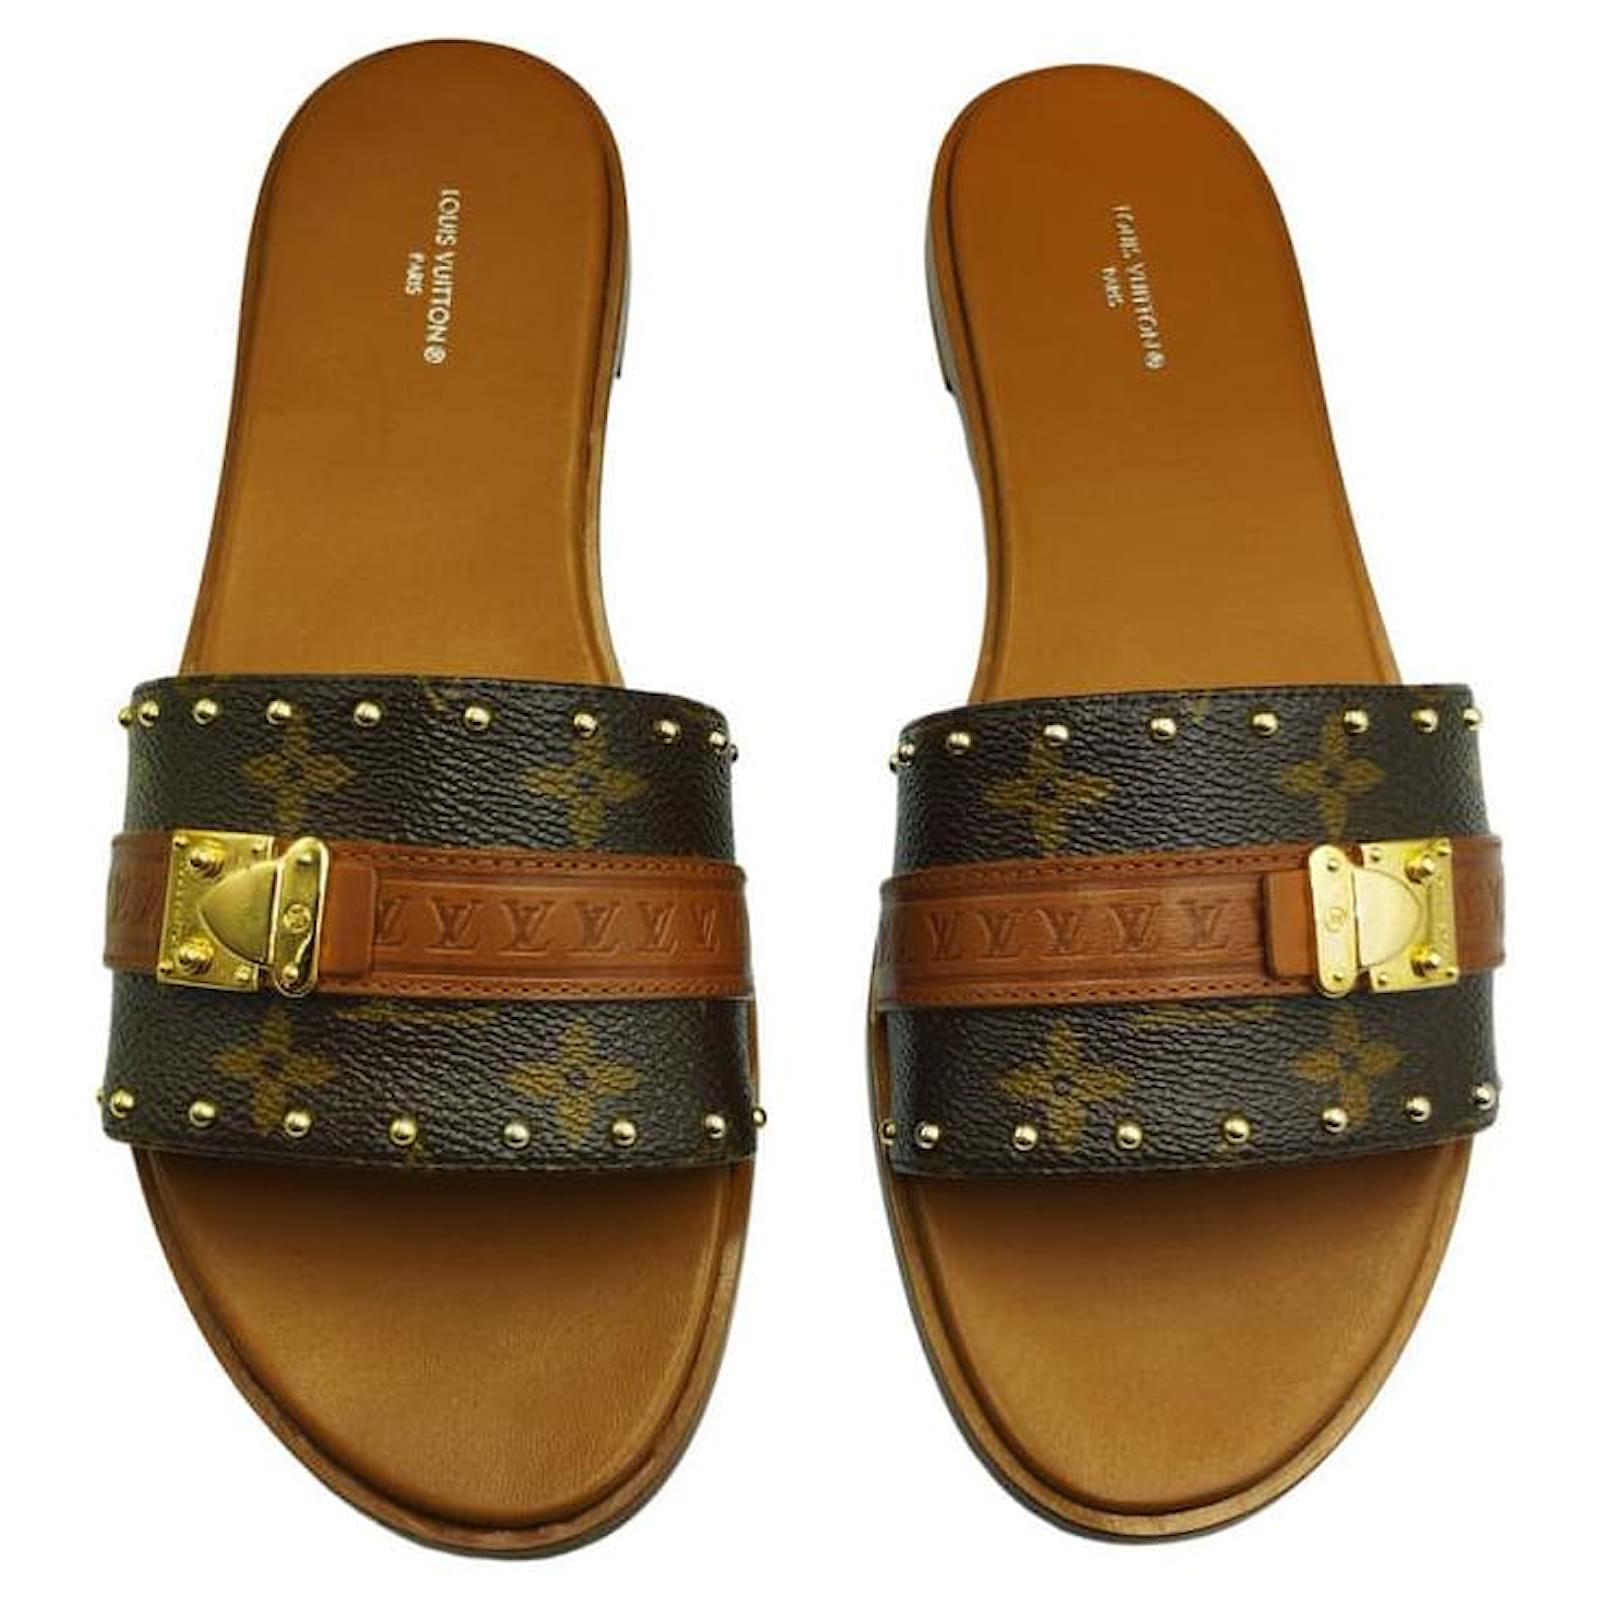 Lock it leather mules Louis Vuitton Brown size 36 EU in Leather